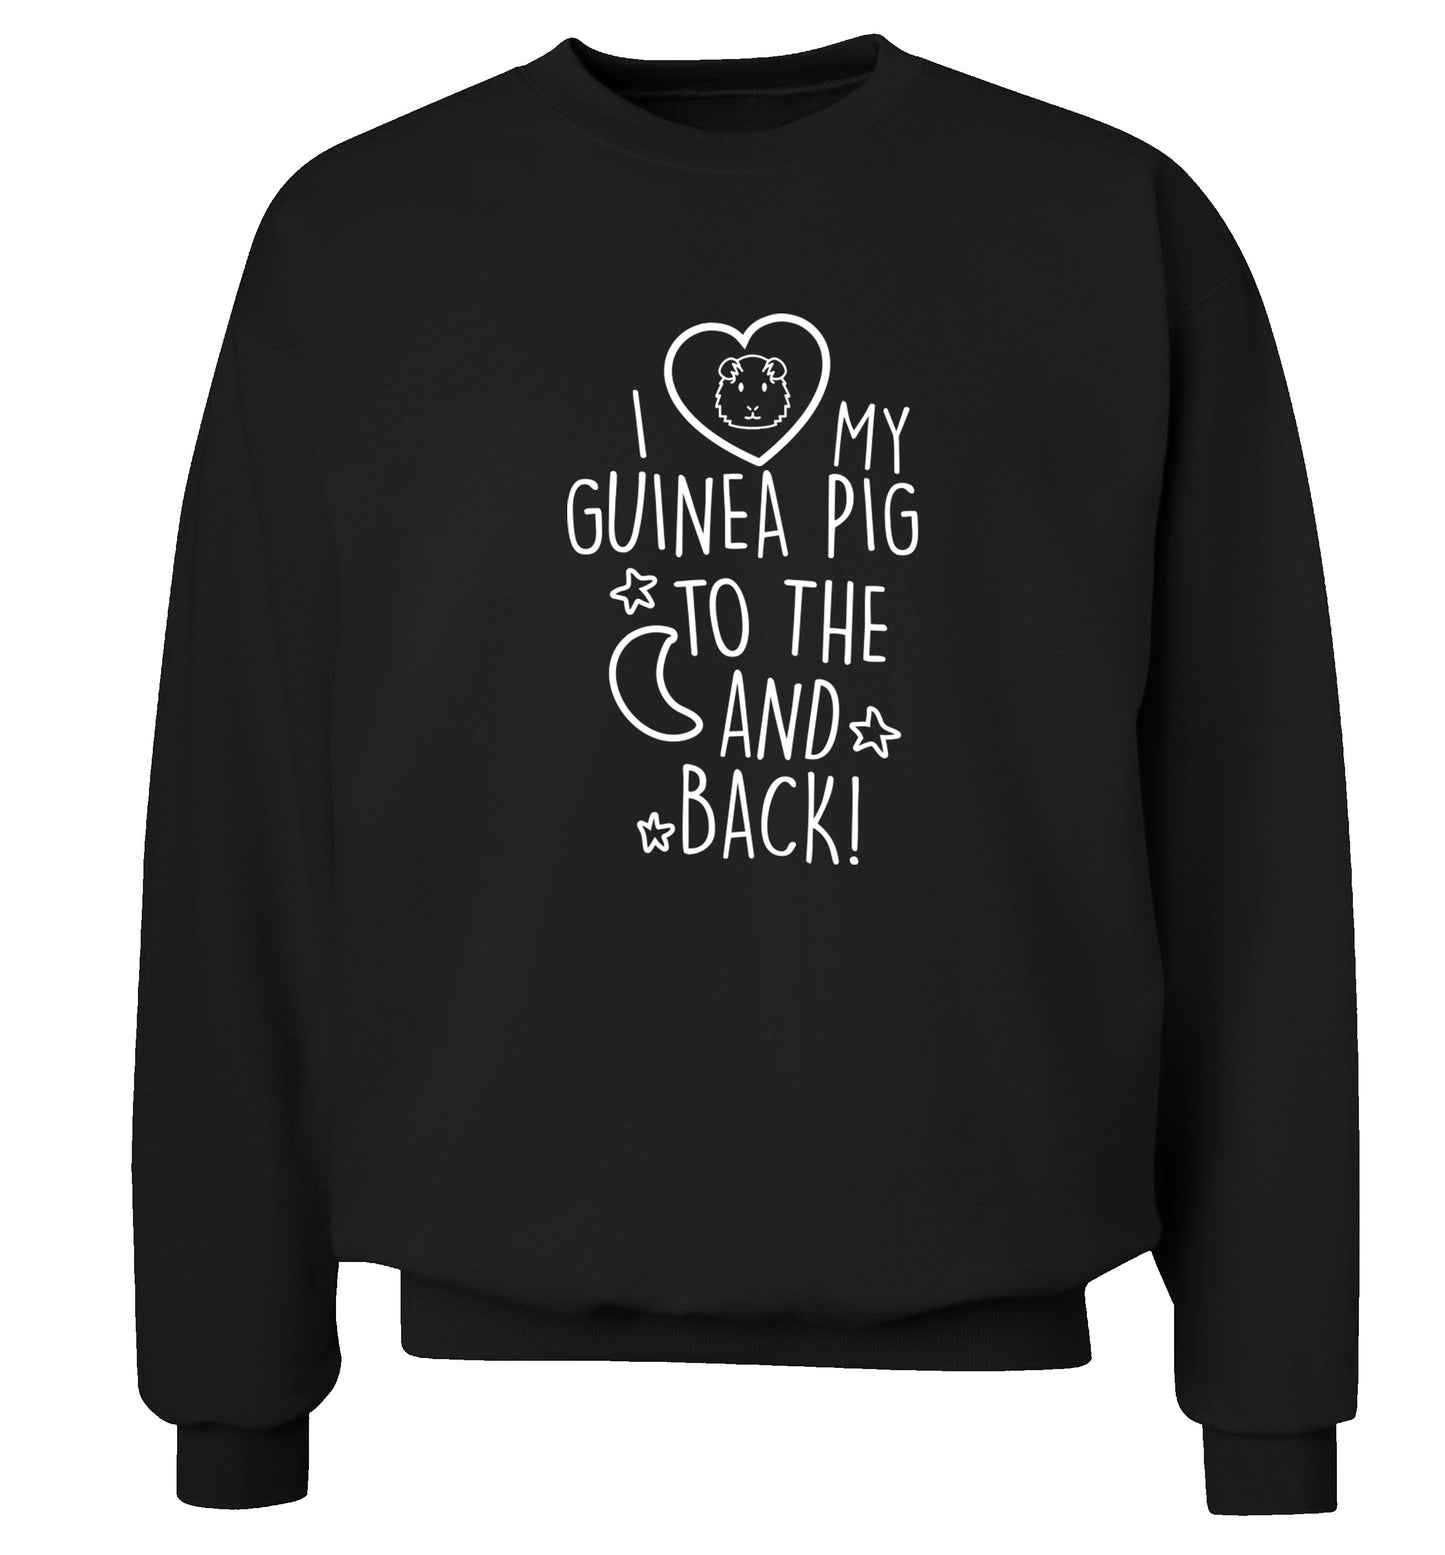 I love my guinea pig to the moon and back Adult's unisex black  sweater 2XL